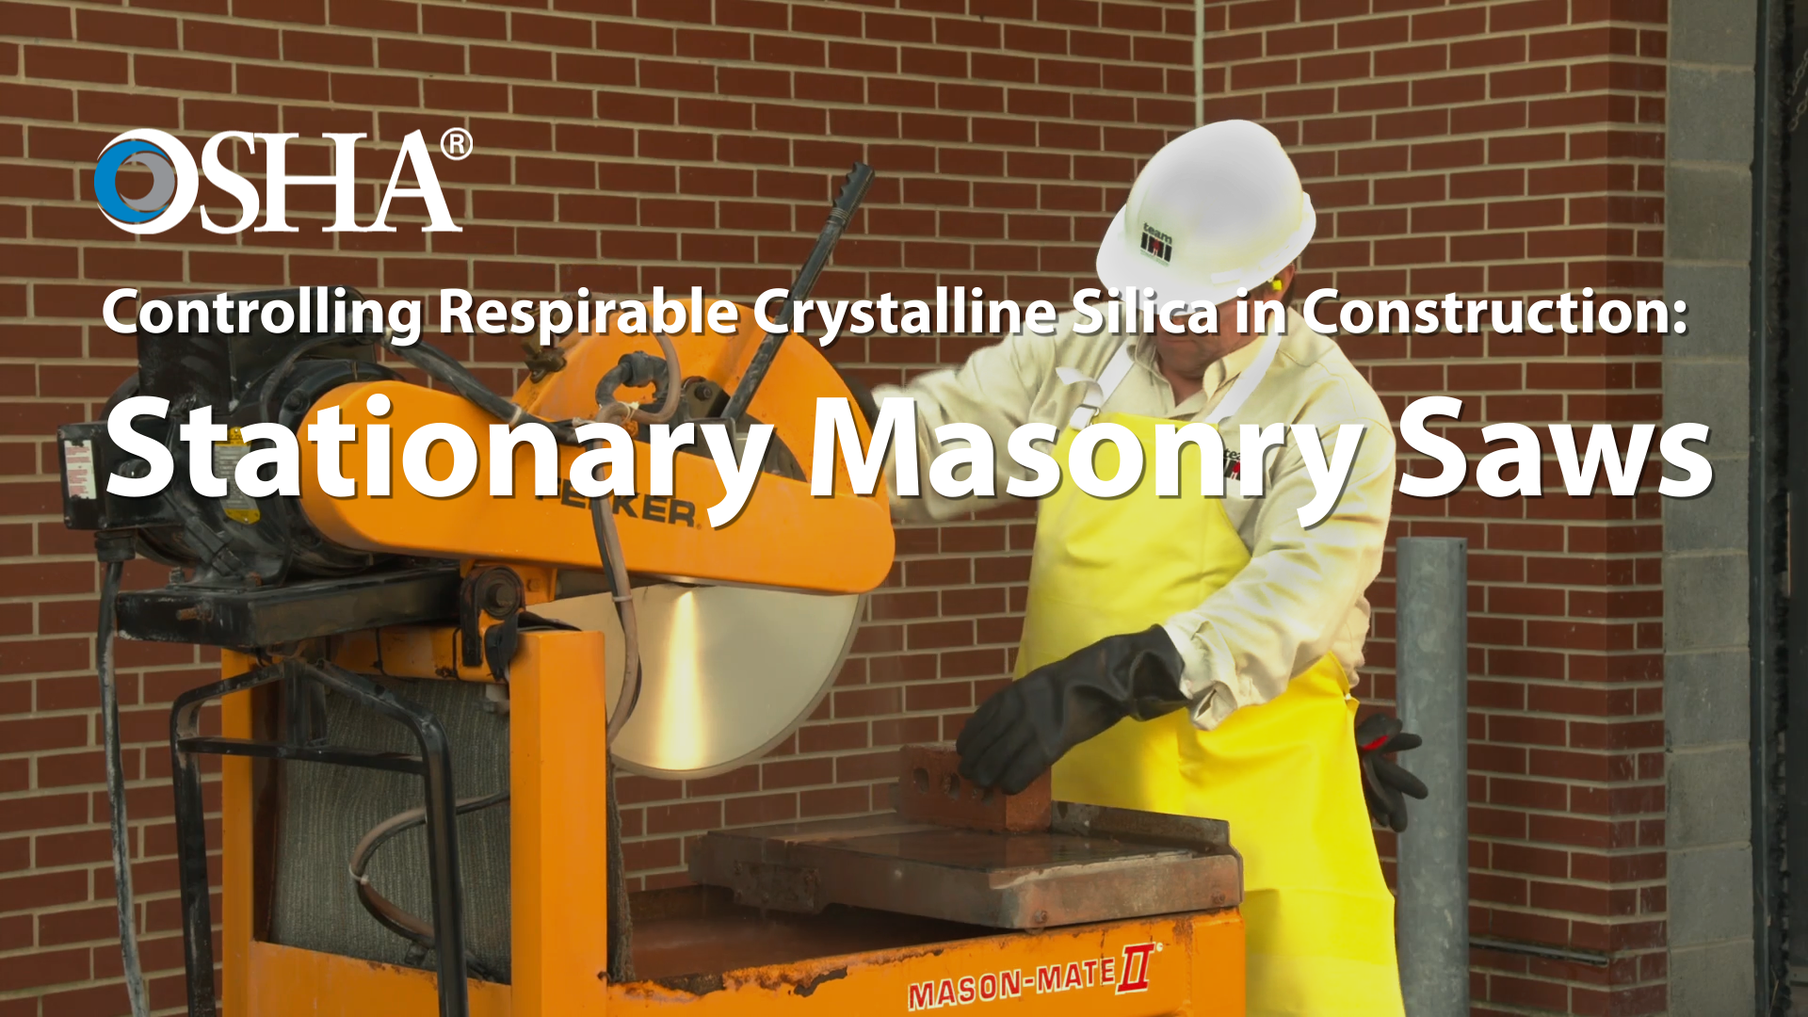 Controlling Respirable Crystalline Silica in Construction: Stationary Masonry Saws